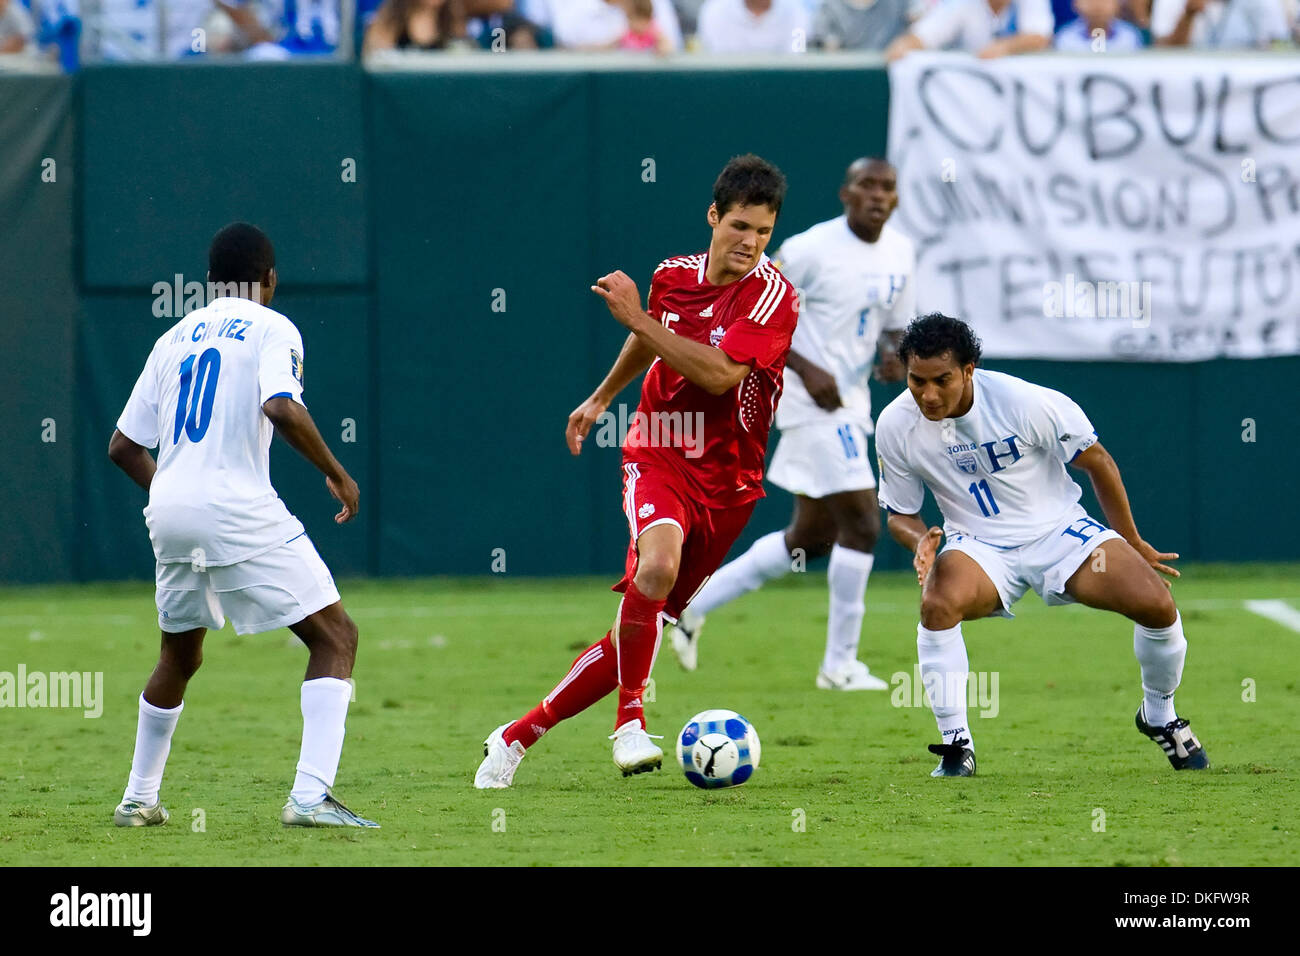 Jul 18, 2009 - Philadelphia, Pennsylvania, USA - Canada's midfielder JOSH SIMPSON (15) trying to split the Honduras' defense of attacker MARVIN CHAVEZ (10) and defender MARIANO ACEVEDO (11) during the CONCACAF Gold Cup quarter finals match between Canada and Honduras at Lincoln Financial Field in Philadelphia, Pennsylvania.  Honduras beat Canada, 1-0. (Credit Image: © Christopher S Stock Photo